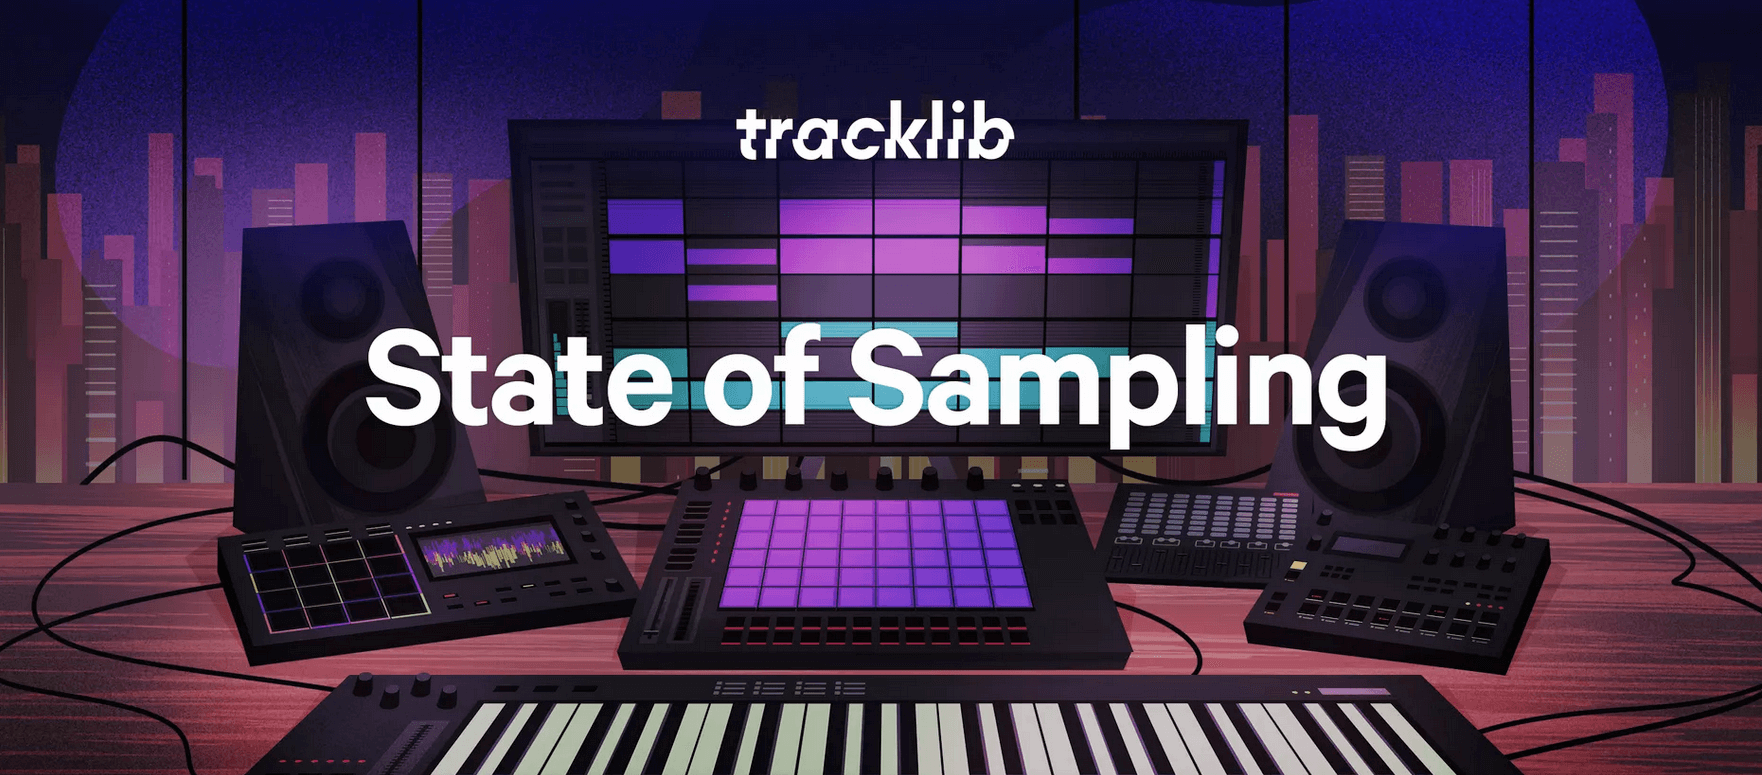 Tracklib Presents The State of Sampling